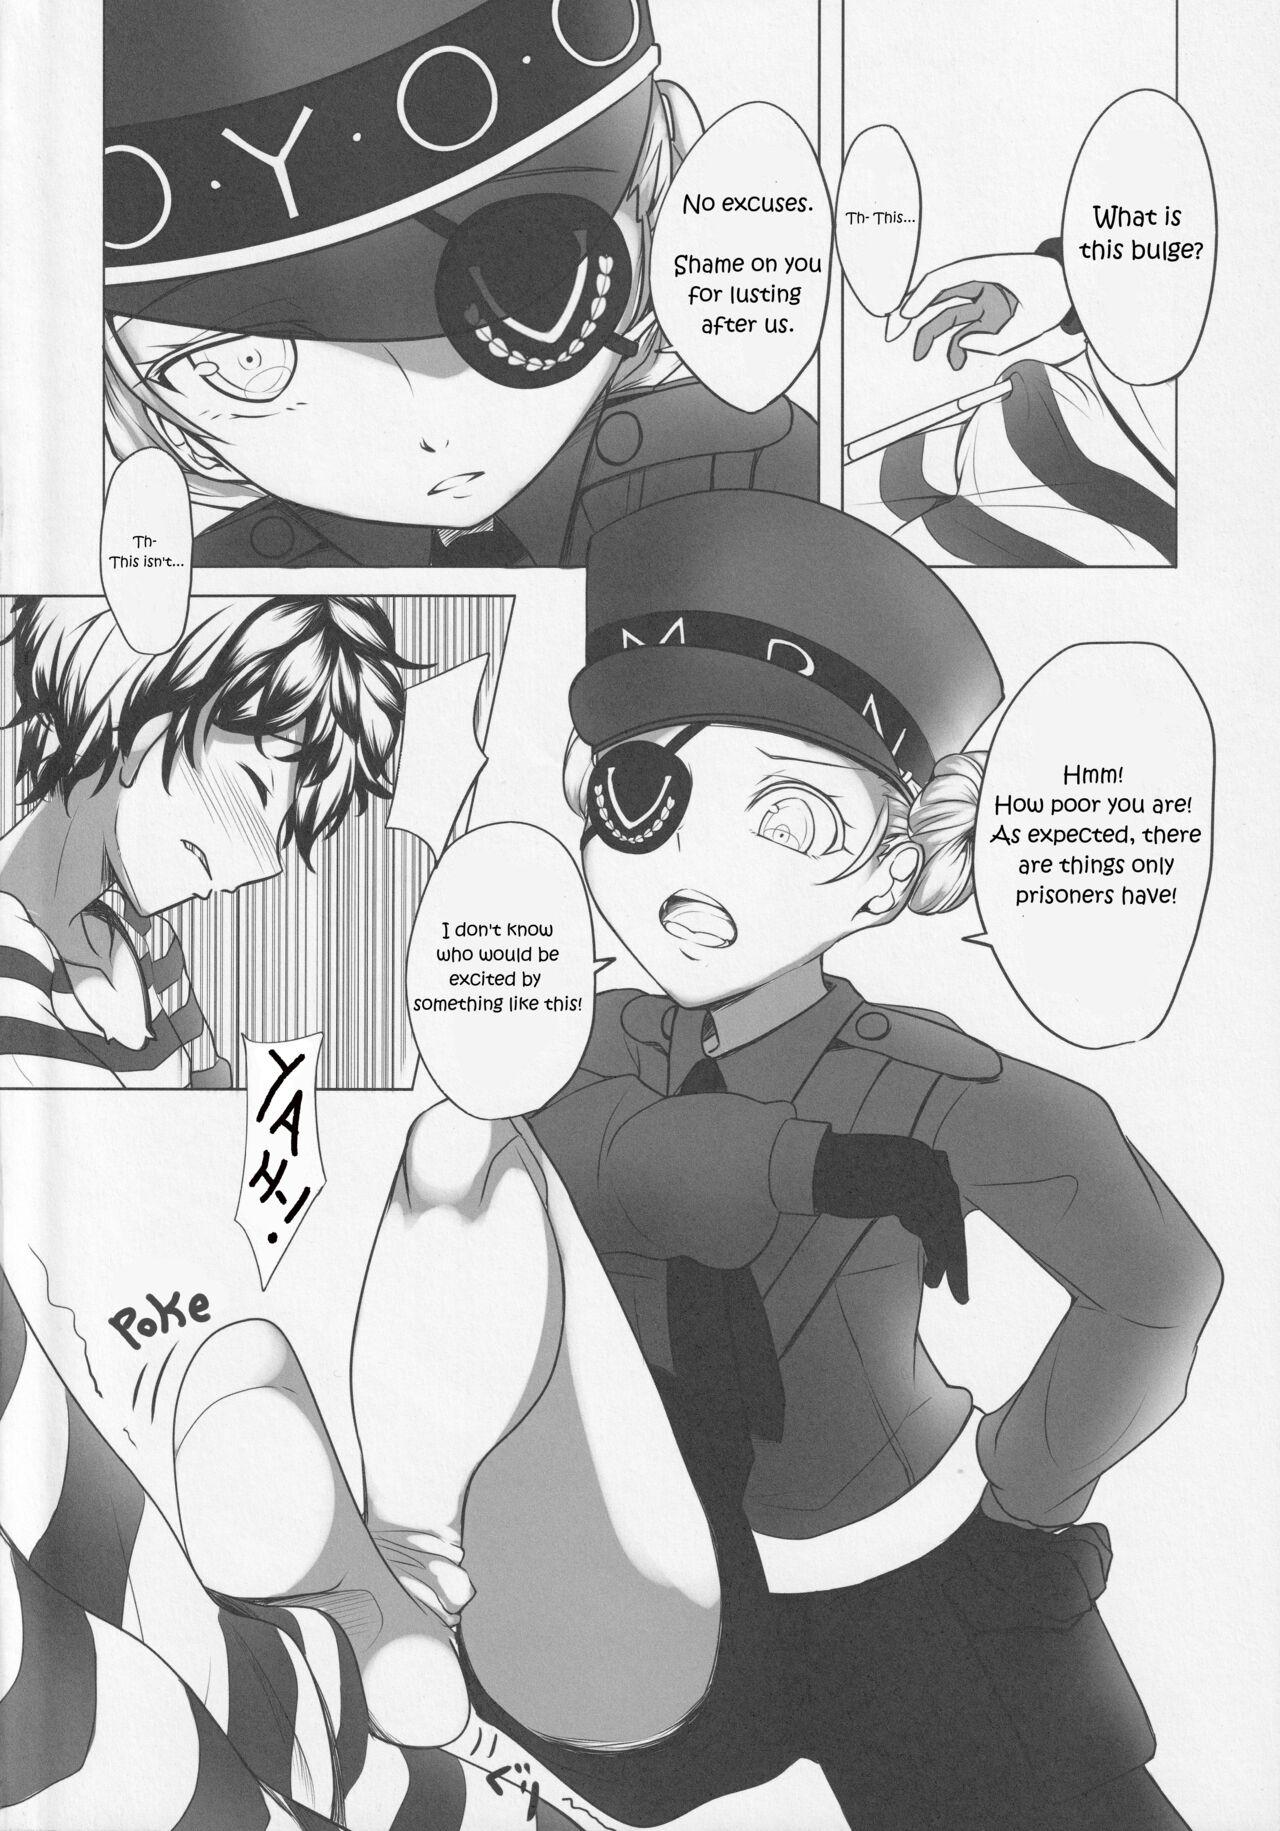 Camgirls Sounds Like You Need a Revive! - Persona 5 Black - Page 3